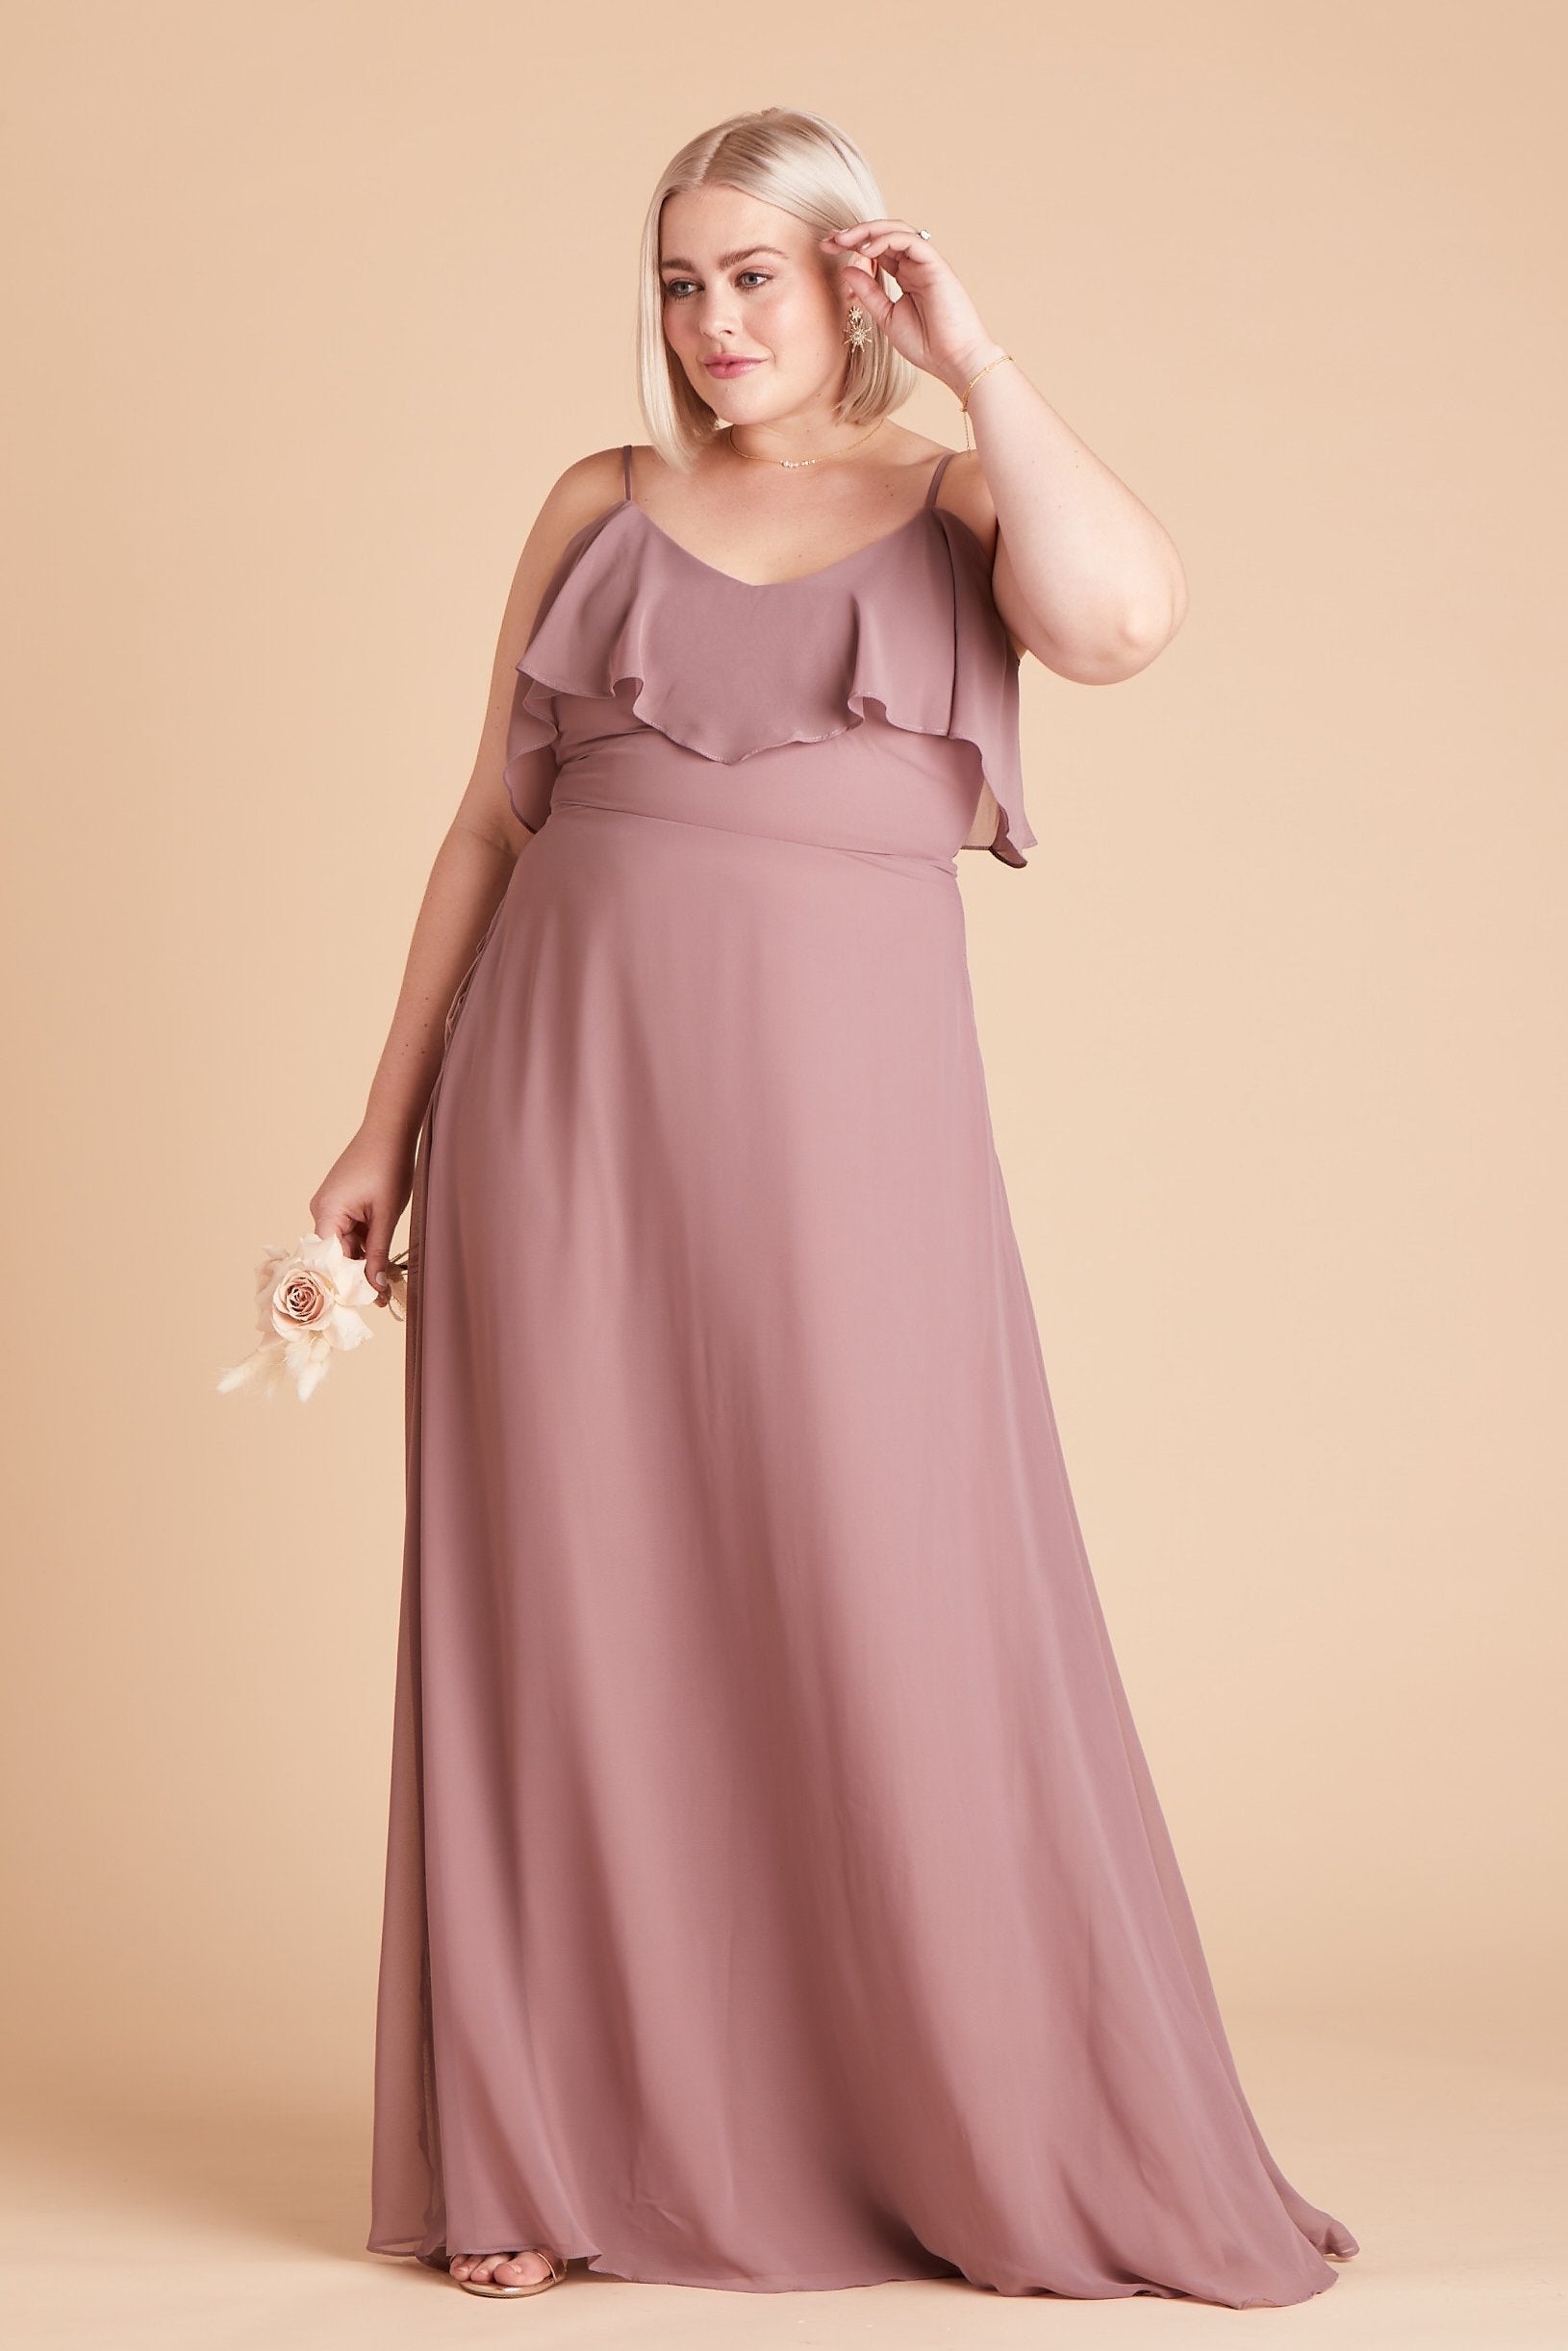 Jane convertible plus size bridesmaid dress in dark mauve chiffon by Birdy Grey, front view